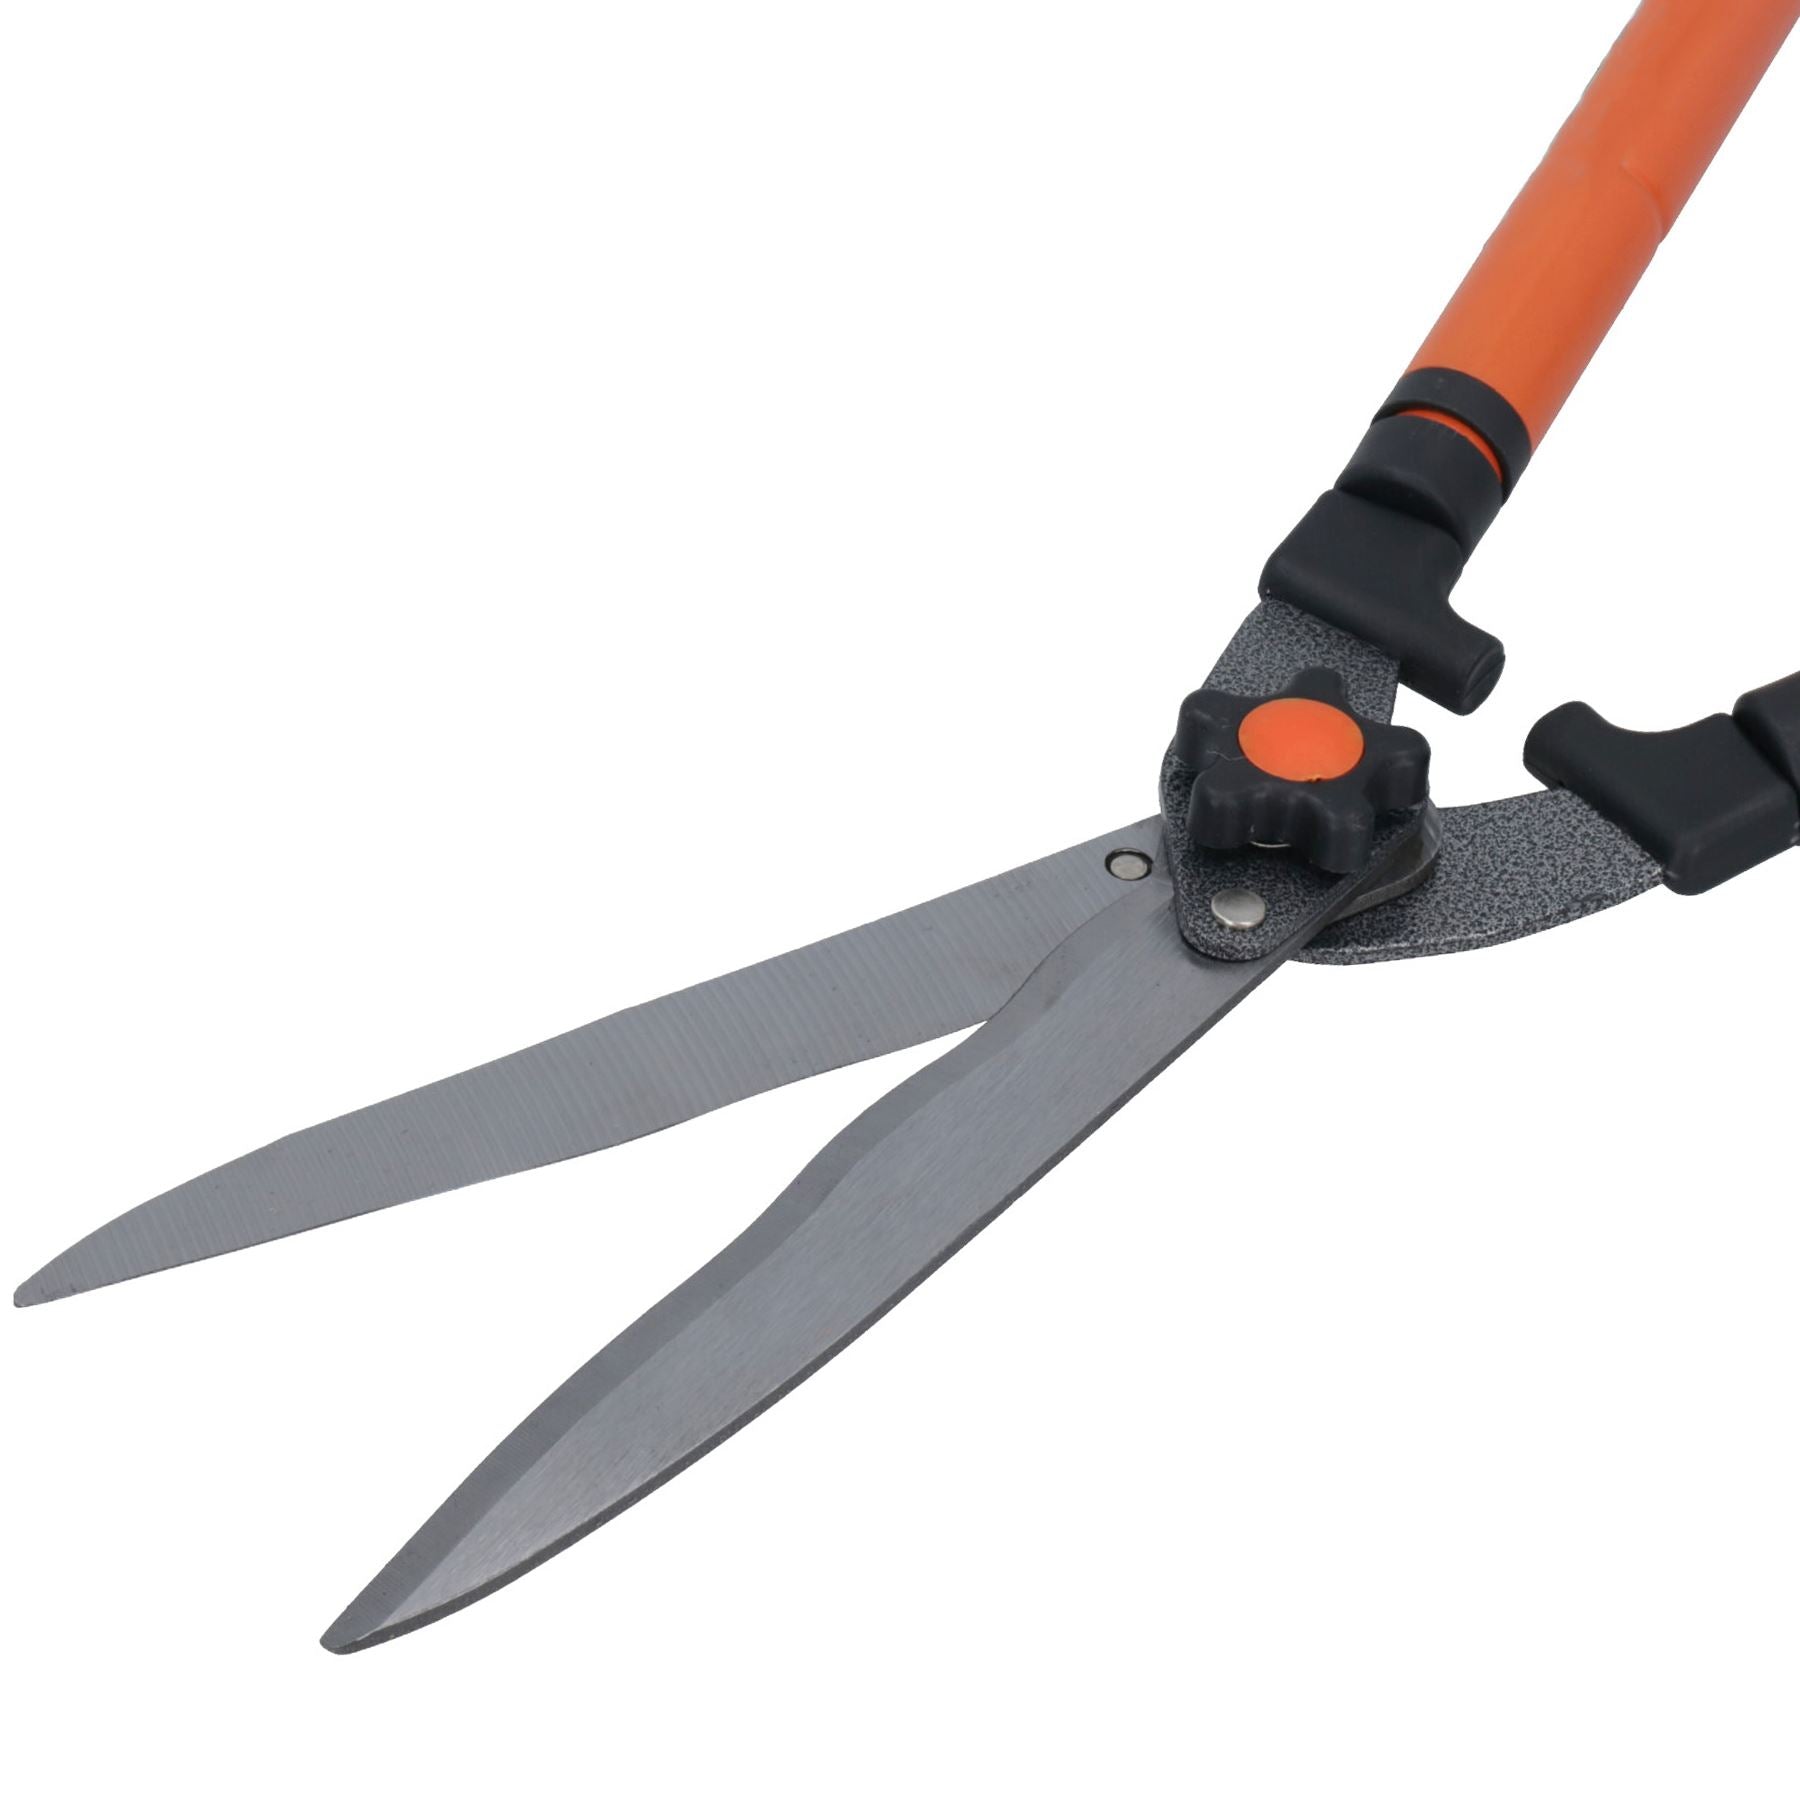 Extending Handle Hedge Bush Shears Trimmers Cutters Soft Grip 8" (200mm)